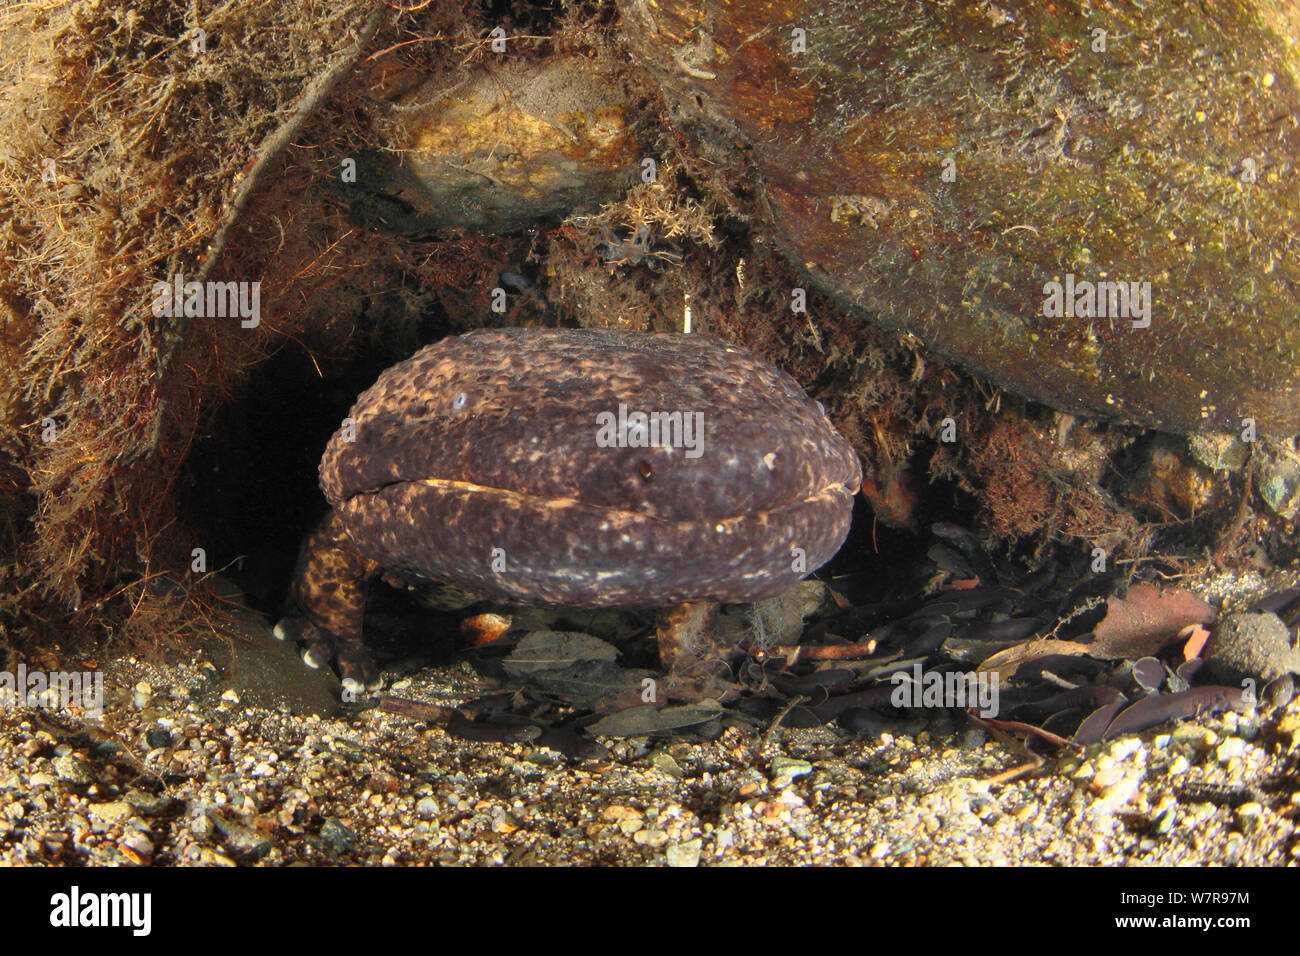 Japanese giant salamander (Andrias japonicus) with larvae ready to leave the nest, Hino-river Tottori-ken Japan, March Stock Photo